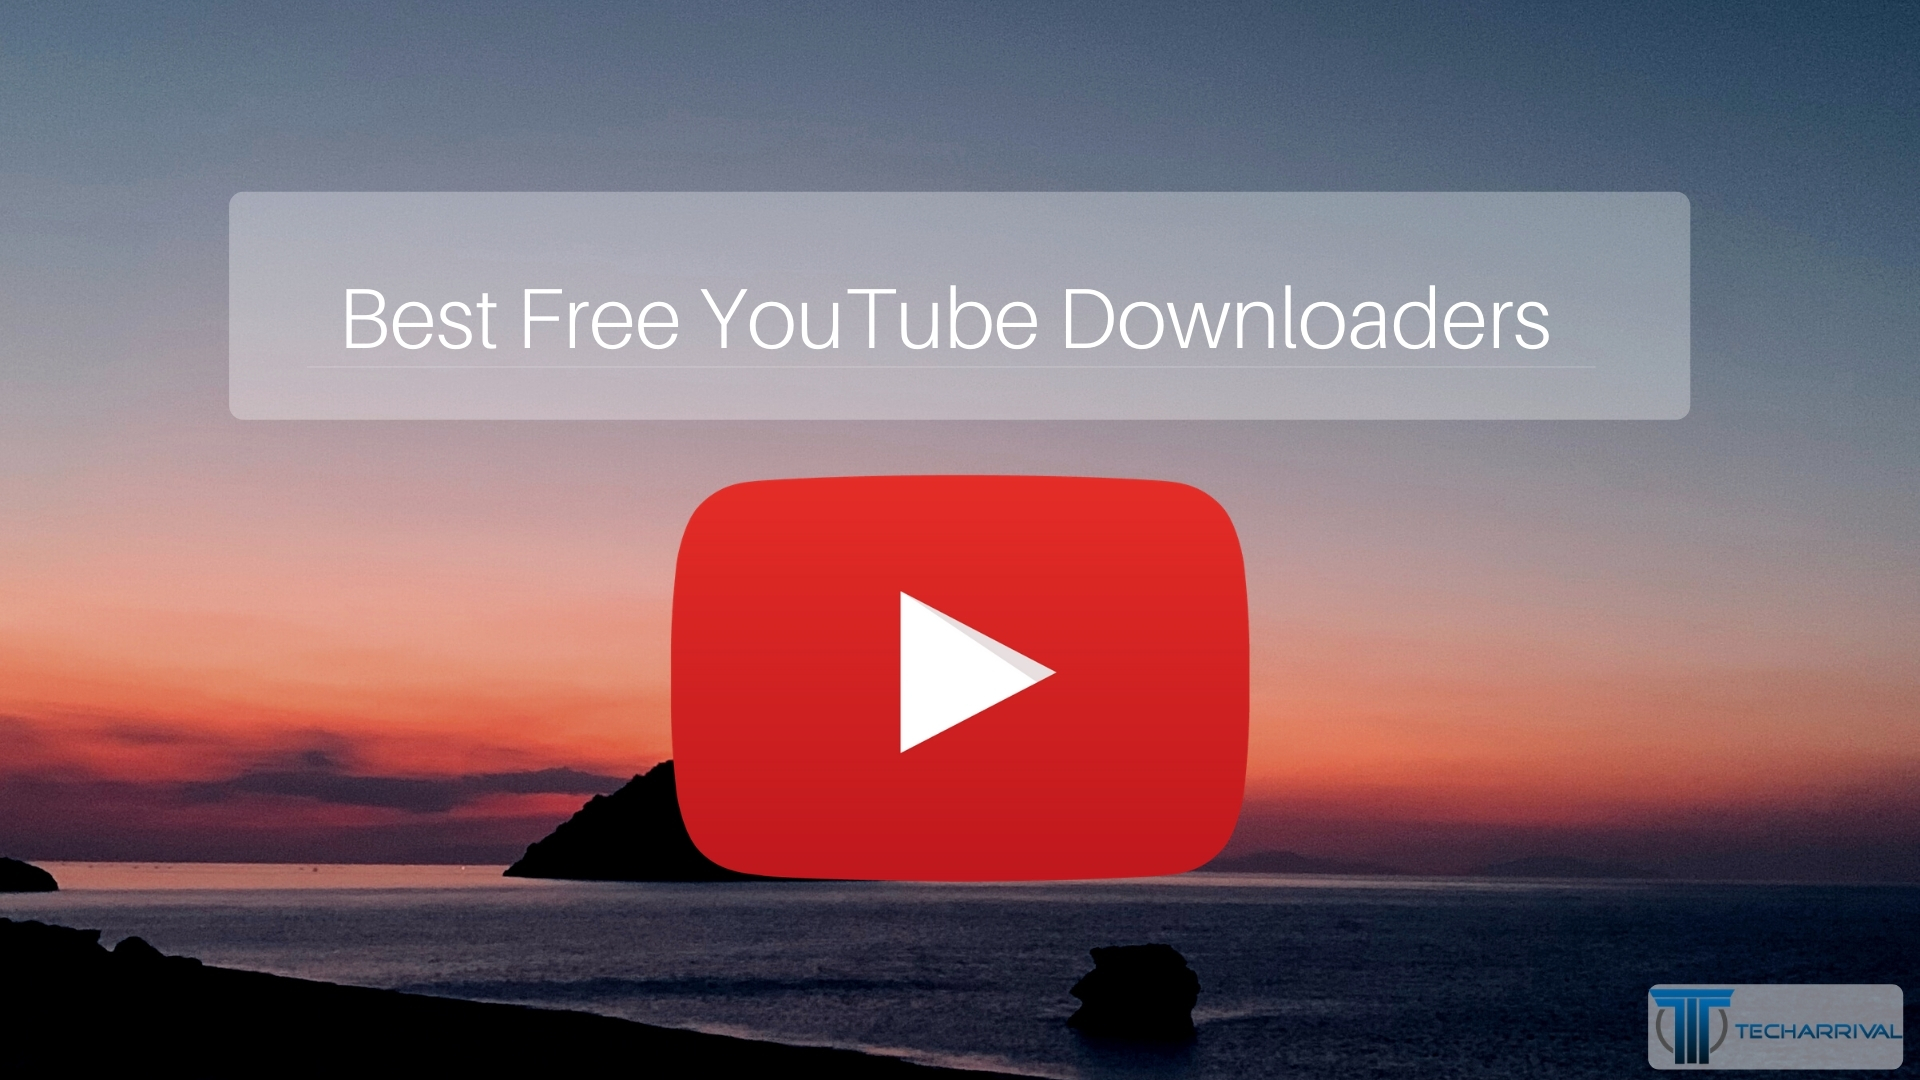 Download you tube free download vectors free